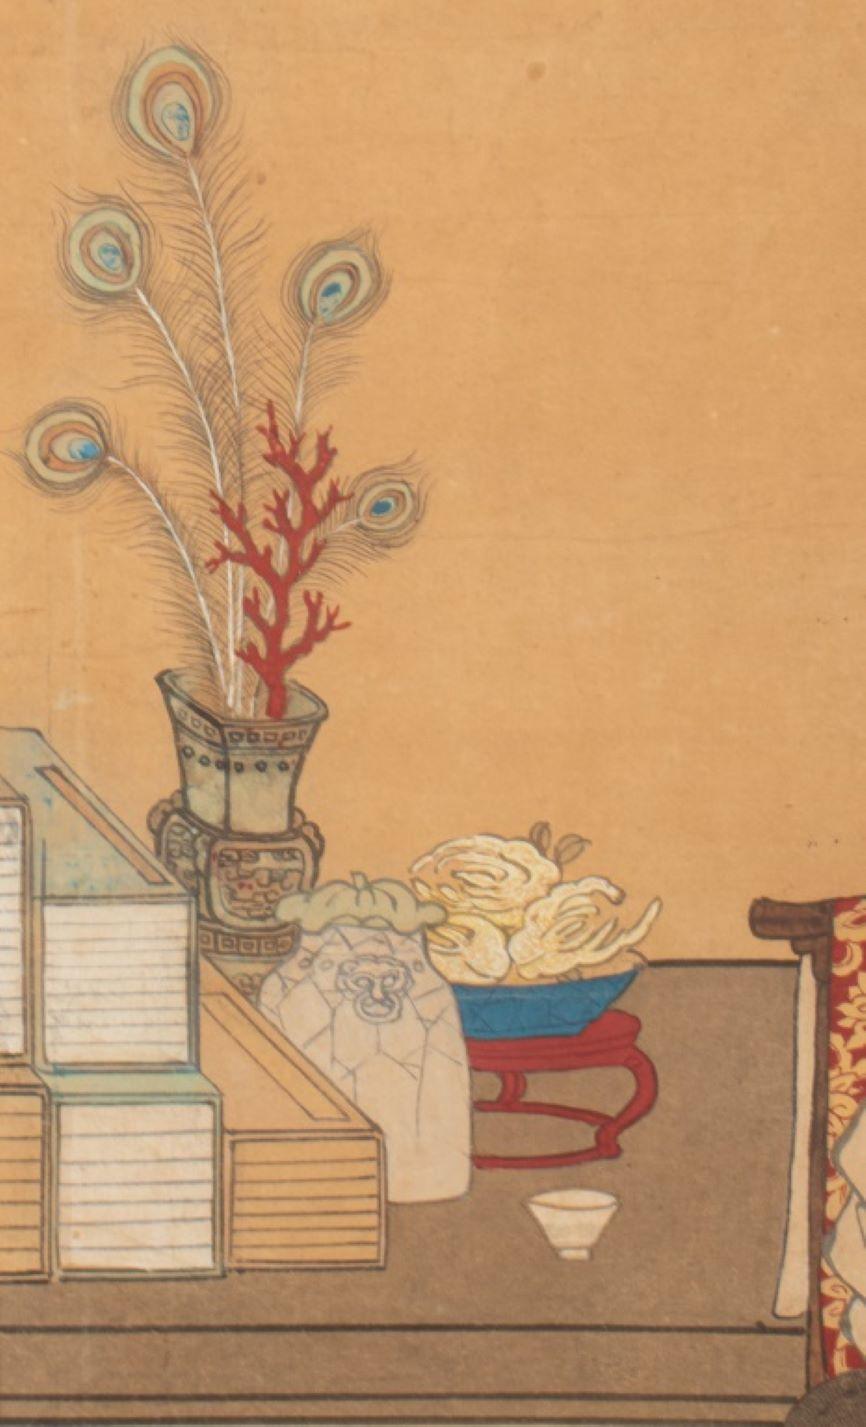 Chinese School, Four Figures Ancestral Portrait Painting, Ink on Paper, depicting four seated women, all wearing robes and three hats with one donning a diadem crown, objects including books, vases, cherry blossom flowers, and a bowl filled with